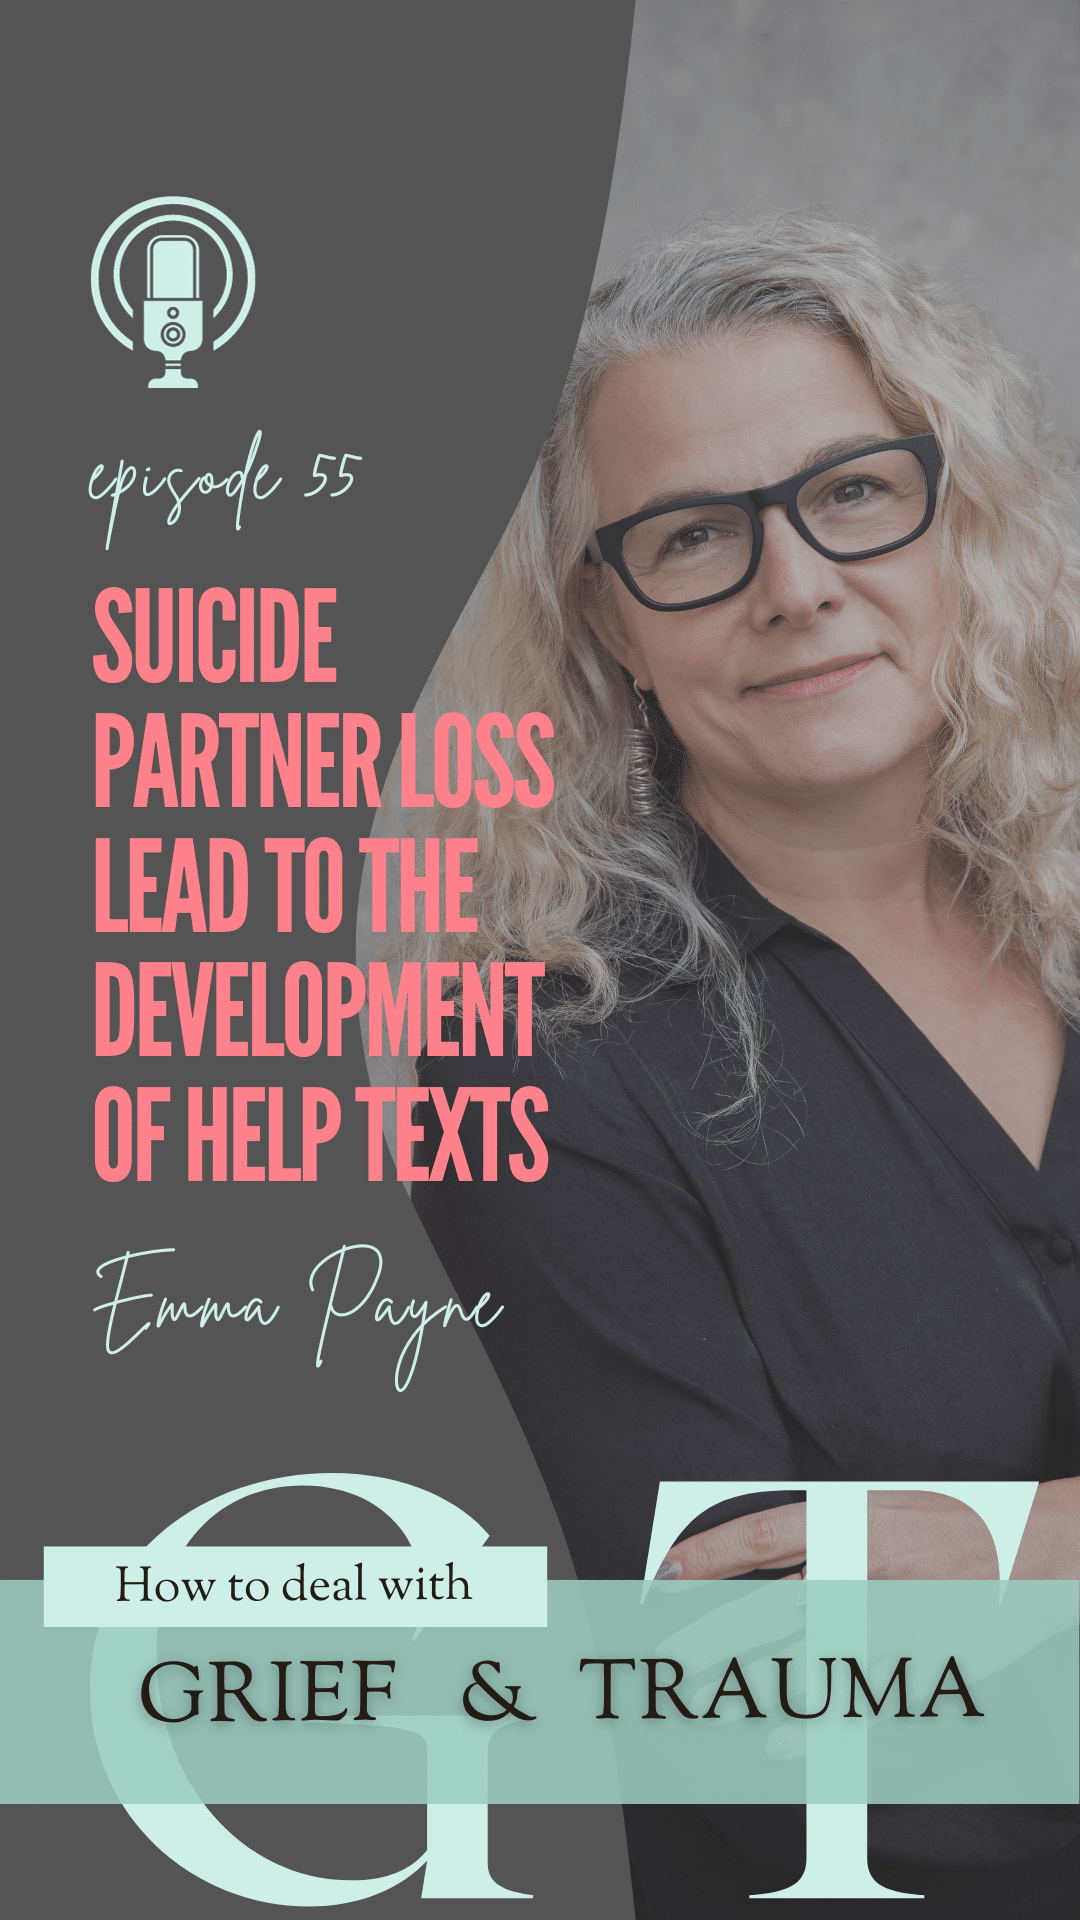 55 Emma Payne Dealing with Suicide Partner Loss Led to the Development of Help Texts